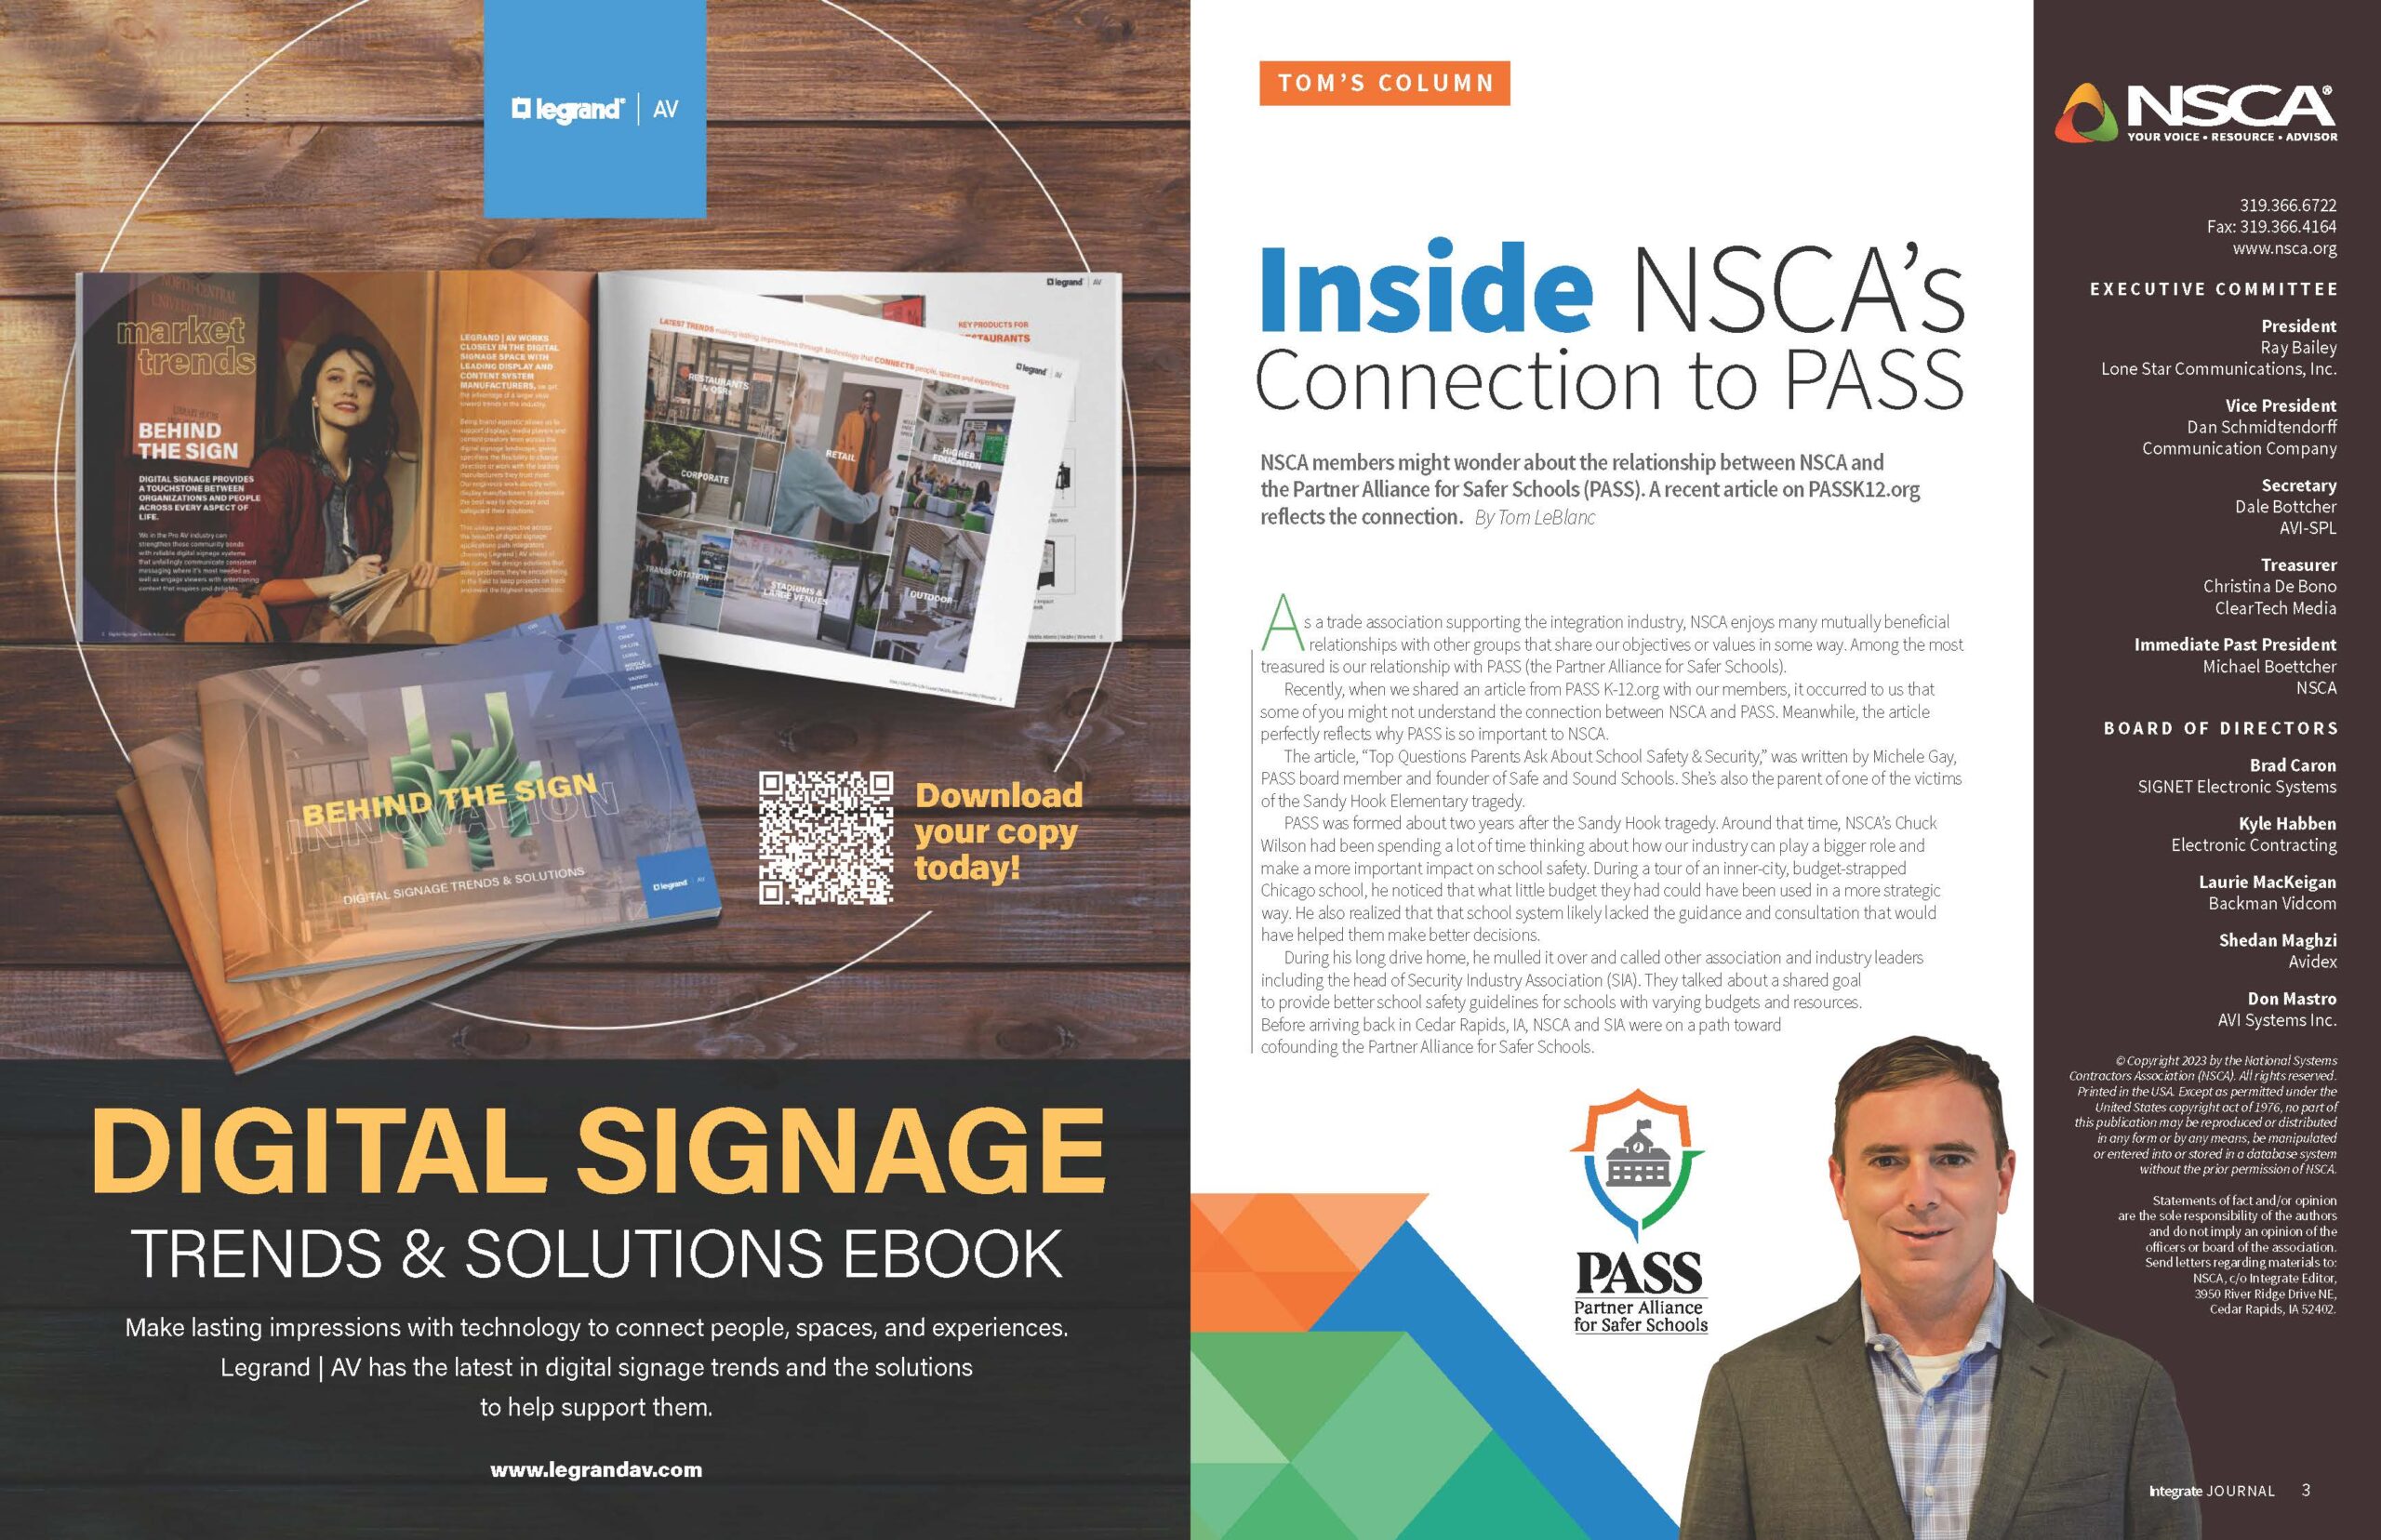 Digital Signage Trends and solutions book